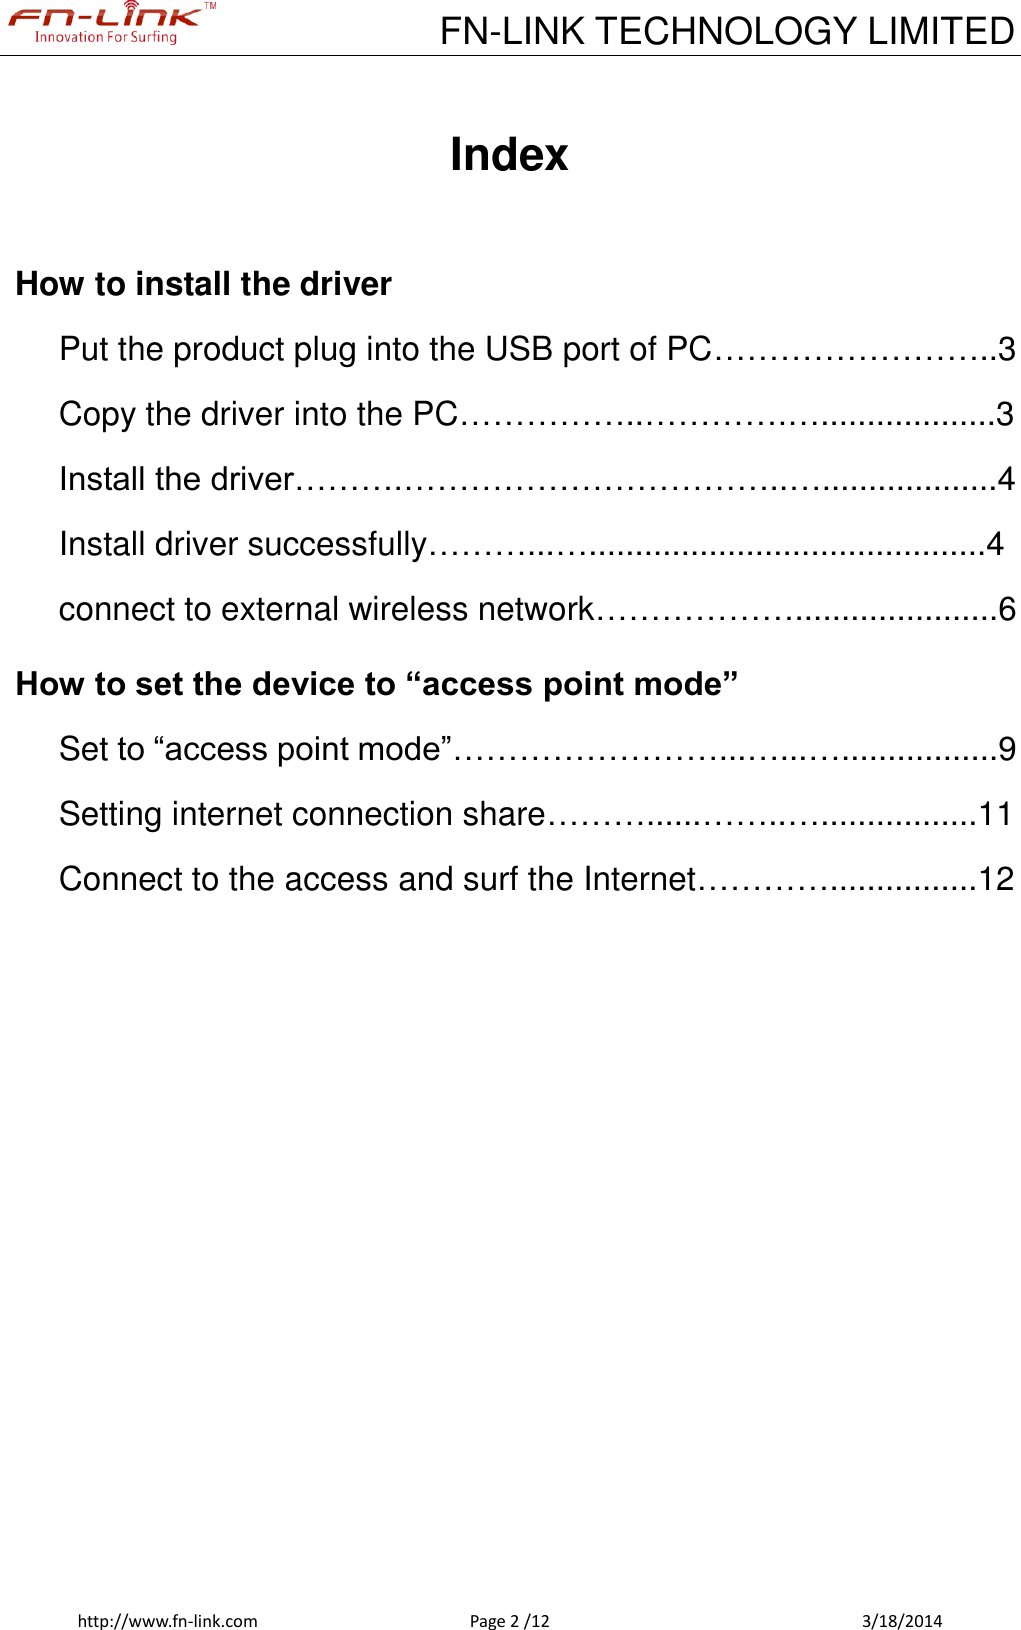             FN-LINK TECHNOLOGY LIMITED http://www.fn-link.com  Page 2 /12            3/18/2014  Index  How to install the driver Put the product plug into the USB port of PC……………………..3 Copy the driver into the PC……………..………….…...................3 Install the driver……….……………………………..…...................4 Install driver successfully………...…...........................................4 connect to external wireless network………………......................6 How to set the device to “access point mode” Set to “access point mode”……………………...…...….................9 Setting internet connection share………......……..….................11 Connect to the access and surf the Internet…………................12            